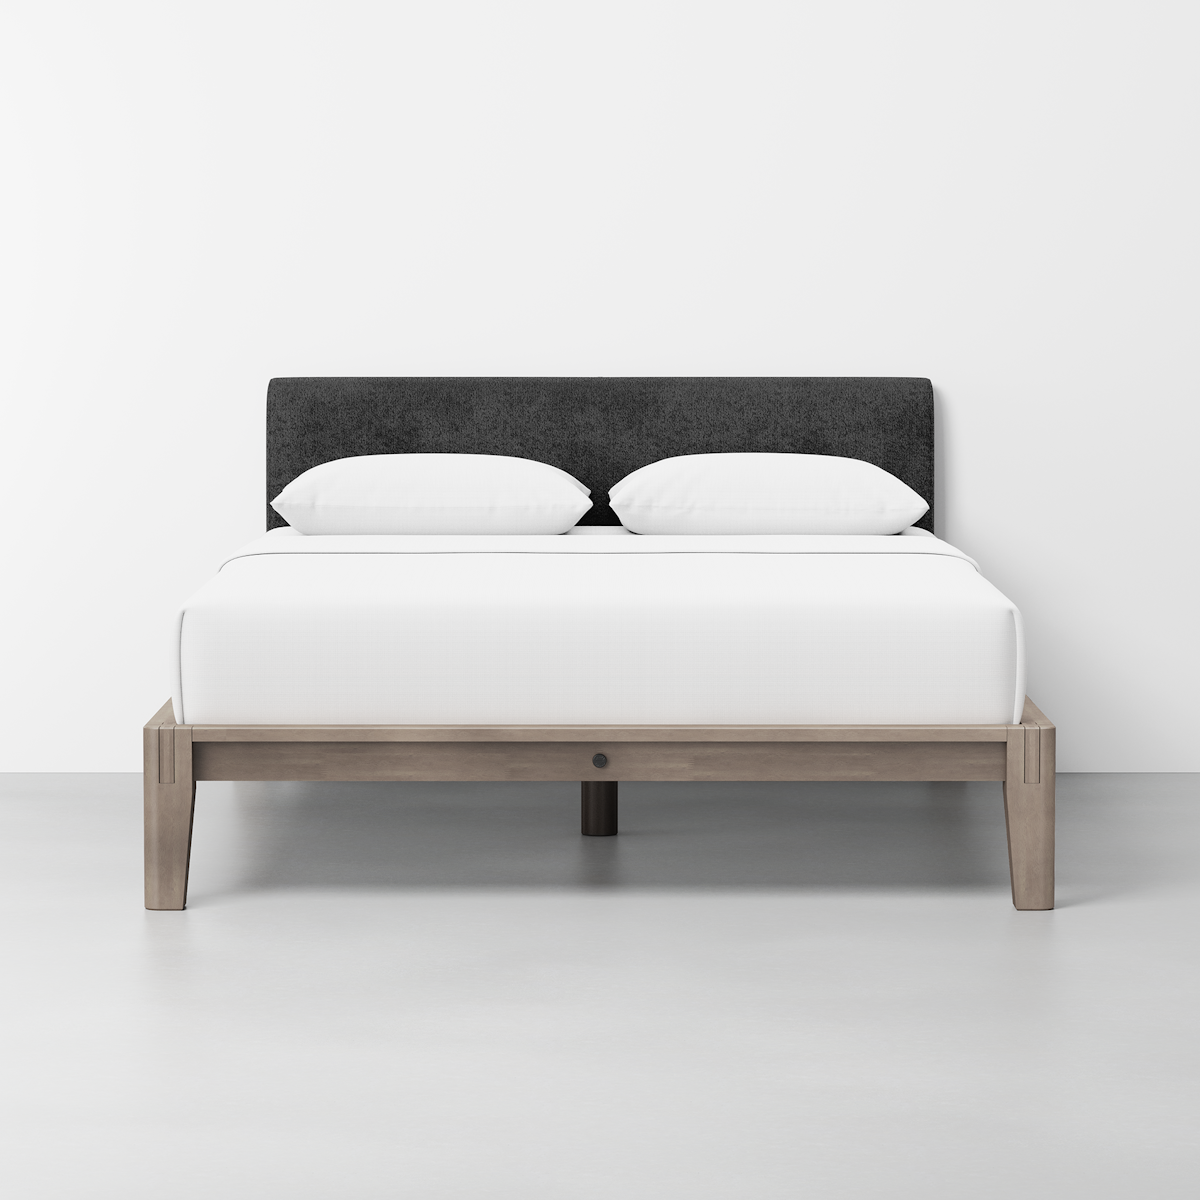 The Bed (Grey / Graphite) - Render - Front